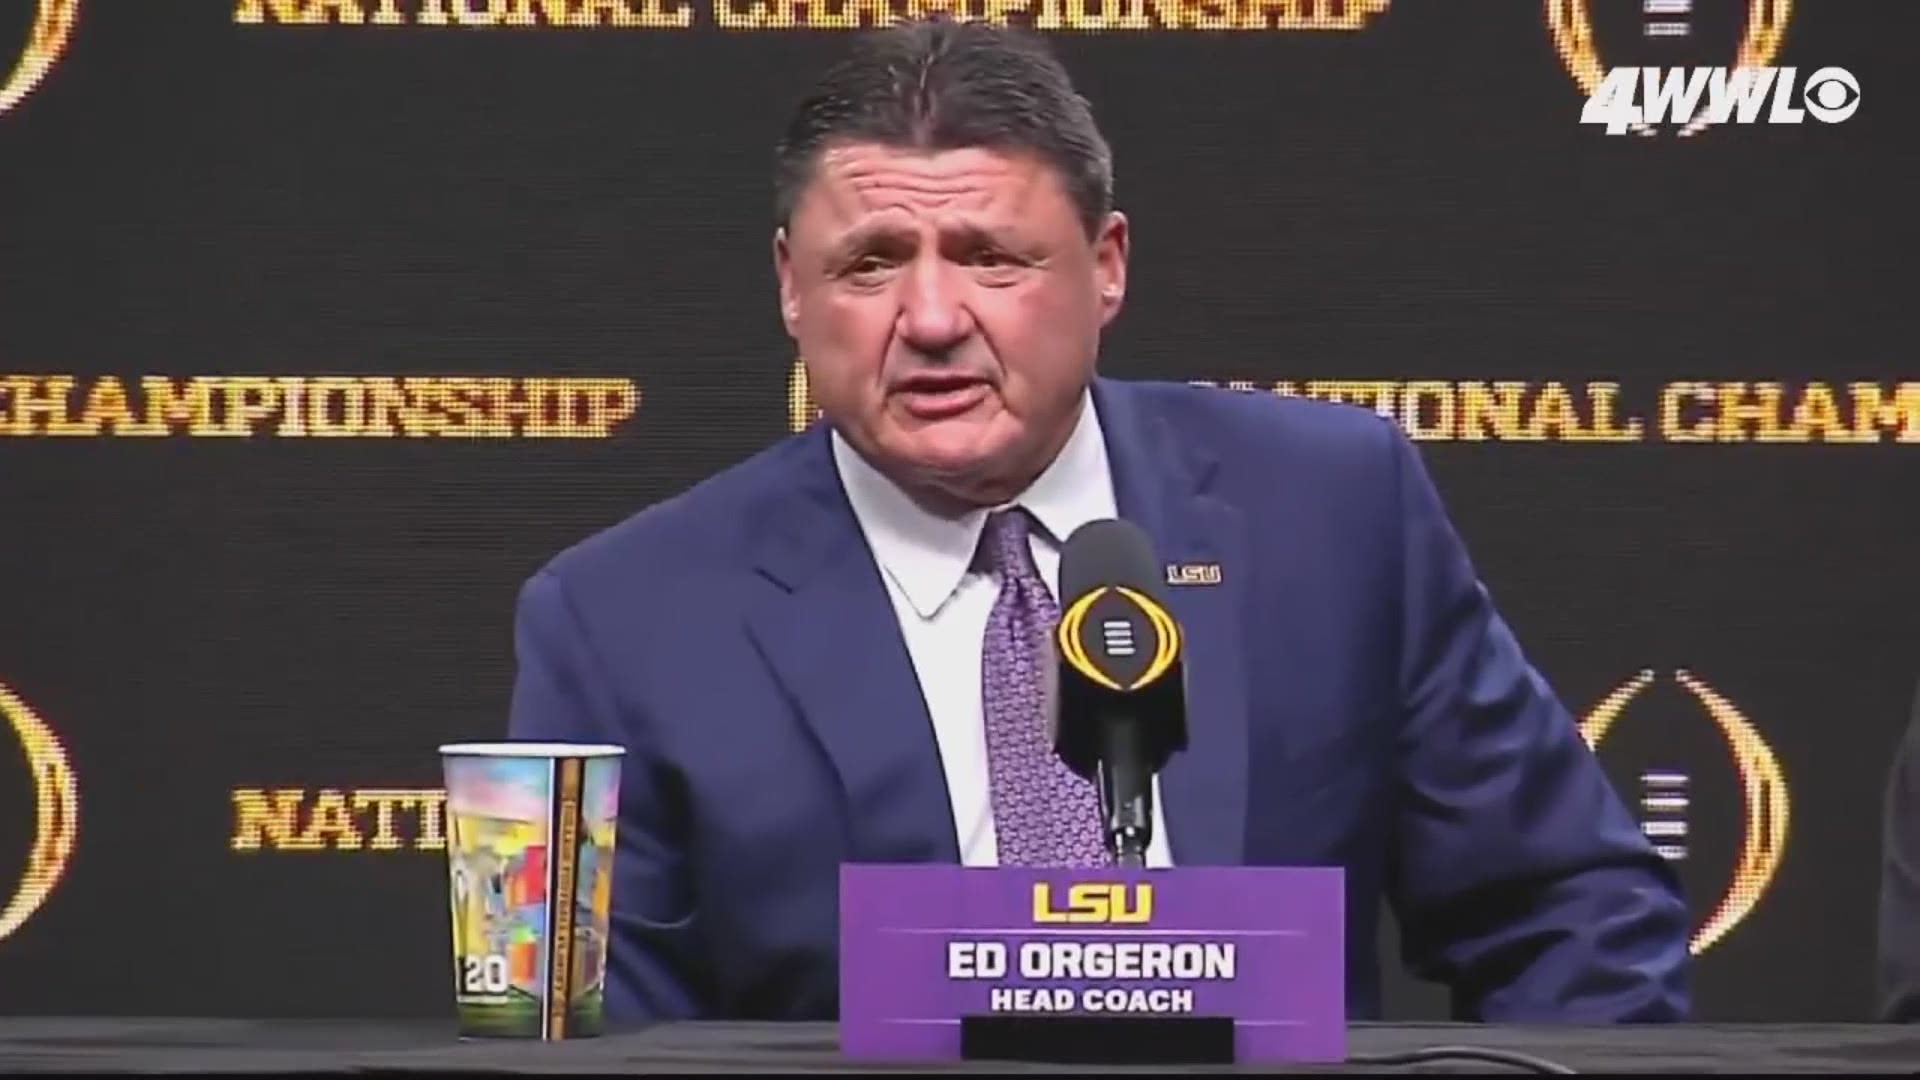 "I think that if you’re a quarterback and you’re looking at LSU right now, you want to be here because of what Joe did," Orgeron said.